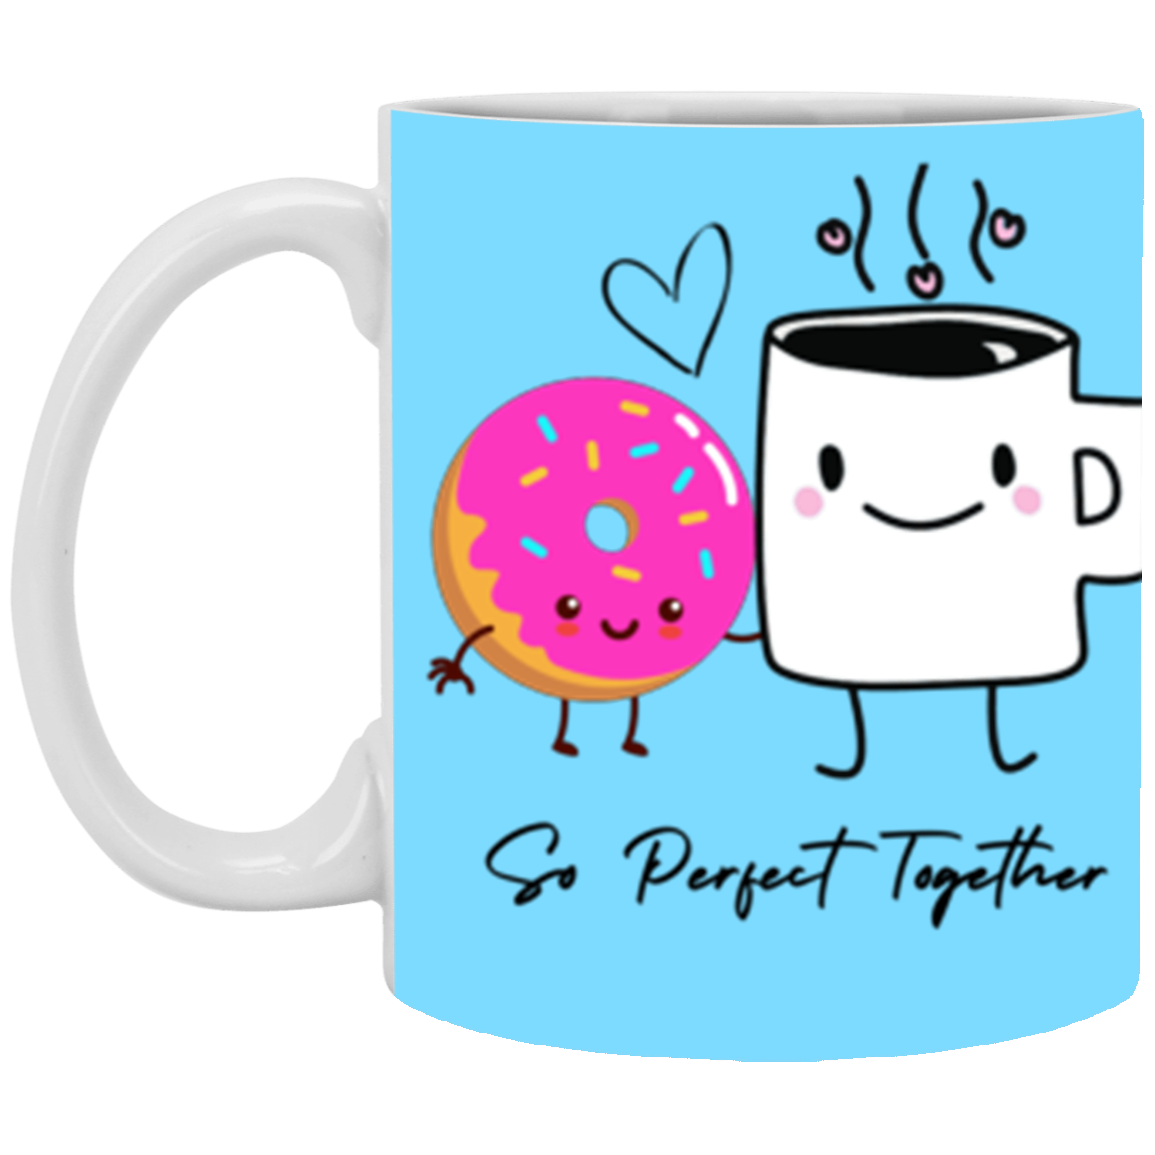 Perfect Together Coffee and Donuts 11 oz. White Mug